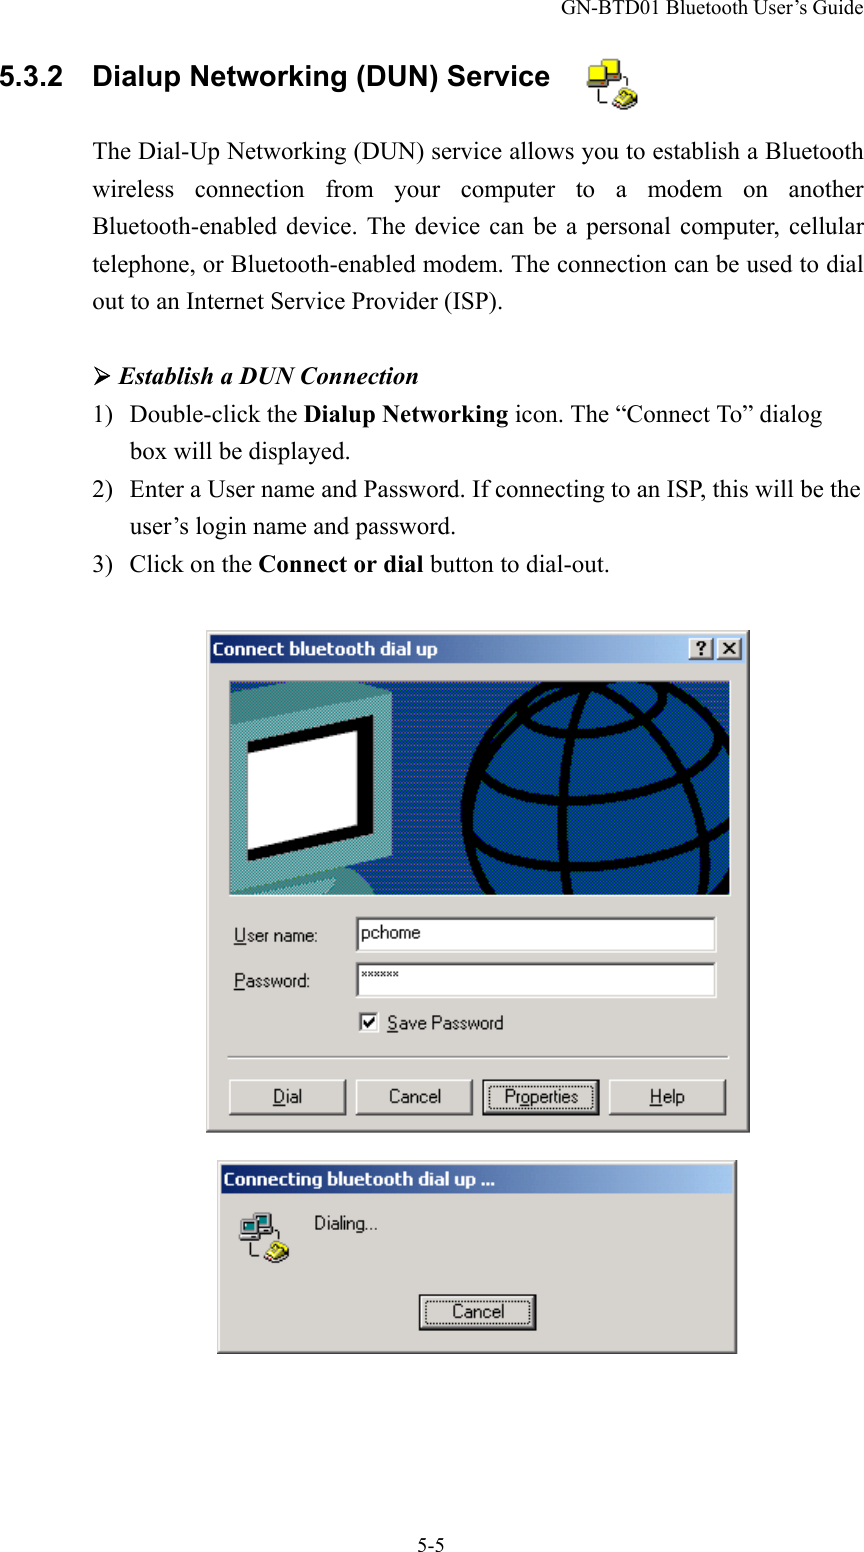 GN-BTD01 Bluetooth User’s Guide 5-5 5.3.2    Dialup Networking (DUN) Service    The Dial-Up Networking (DUN) service allows you to establish a Bluetooth wireless connection from your computer to a modem on another Bluetooth-enabled device. The device can be a personal computer, cellular telephone, or Bluetooth-enabled modem. The connection can be used to dial out to an Internet Service Provider (ISP).   Establish a DUN Connection 1) Double-click the Dialup Networking icon. The “Connect To” dialog box will be displayed. 2)  Enter a User name and Password. If connecting to an ISP, this will be the user’s login name and password. 3)  Click on the Connect or dial button to dial-out.    